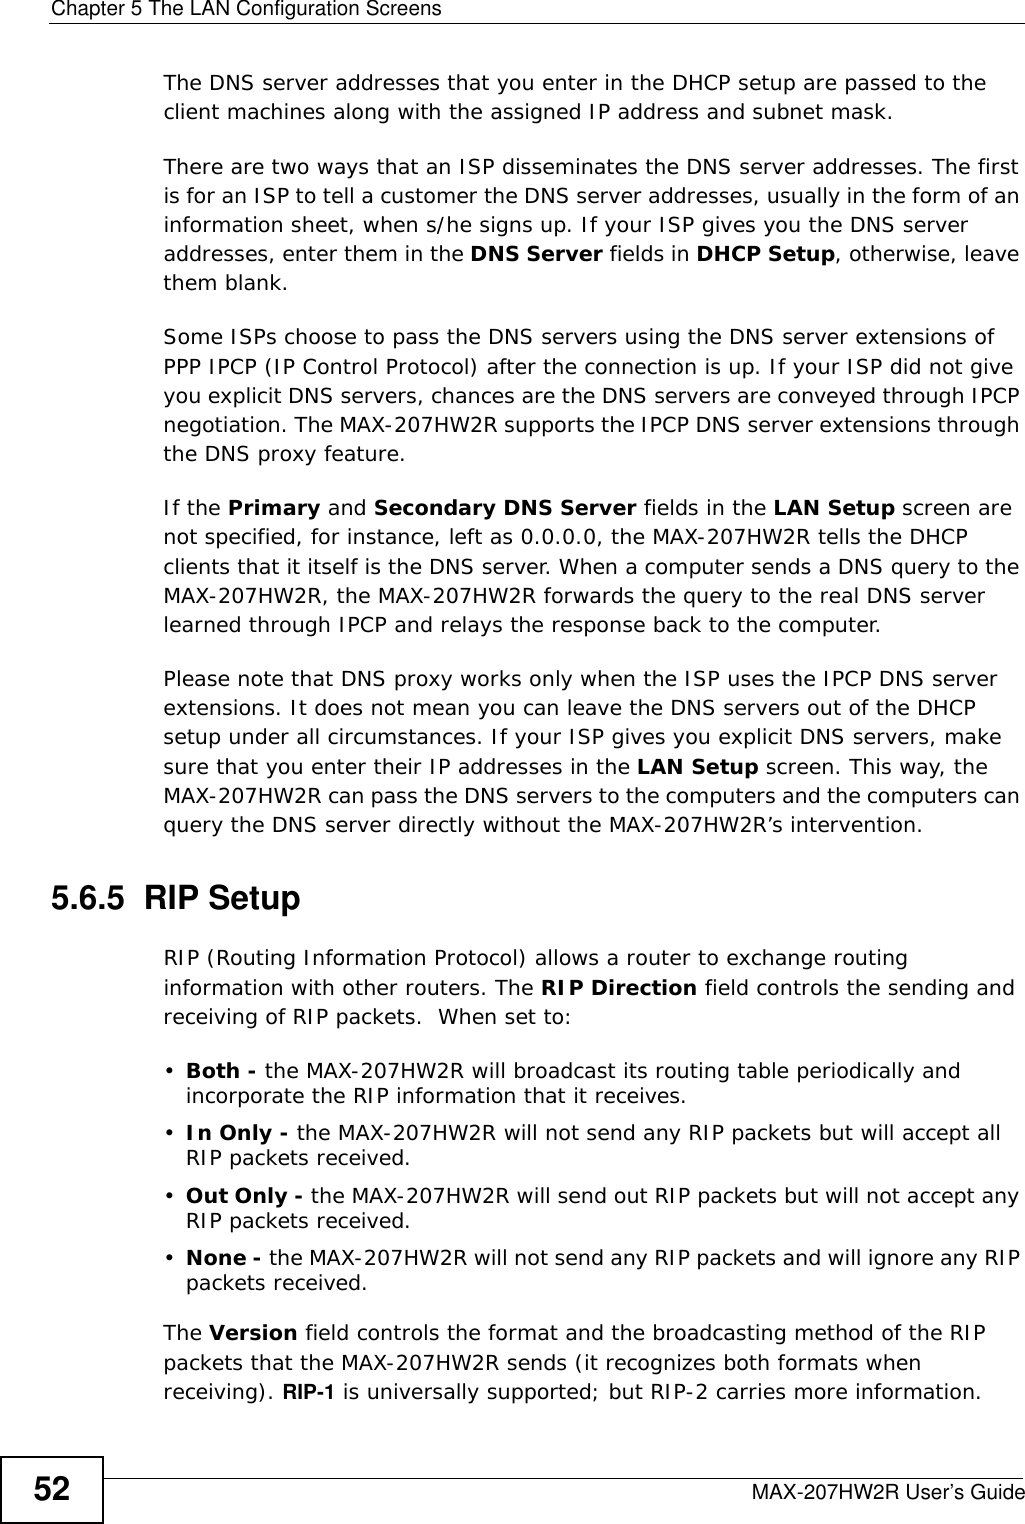 Chapter 5 The LAN Configuration ScreensMAX-207HW2R User’s Guide52The DNS server addresses that you enter in the DHCP setup are passed to the client machines along with the assigned IP address and subnet mask.There are two ways that an ISP disseminates the DNS server addresses. The first is for an ISP to tell a customer the DNS server addresses, usually in the form of an information sheet, when s/he signs up. If your ISP gives you the DNS server addresses, enter them in the DNS Server fields in DHCP Setup, otherwise, leave them blank.Some ISPs choose to pass the DNS servers using the DNS server extensions of PPP IPCP (IP Control Protocol) after the connection is up. If your ISP did not give you explicit DNS servers, chances are the DNS servers are conveyed through IPCP negotiation. The MAX-207HW2R supports the IPCP DNS server extensions through the DNS proxy feature.If the Primary and Secondary DNS Server fields in the LAN Setup screen are not specified, for instance, left as 0.0.0.0, the MAX-207HW2R tells the DHCP clients that it itself is the DNS server. When a computer sends a DNS query to the MAX-207HW2R, the MAX-207HW2R forwards the query to the real DNS server learned through IPCP and relays the response back to the computer.Please note that DNS proxy works only when the ISP uses the IPCP DNS server extensions. It does not mean you can leave the DNS servers out of the DHCP setup under all circumstances. If your ISP gives you explicit DNS servers, make sure that you enter their IP addresses in the LAN Setup screen. This way, the MAX-207HW2R can pass the DNS servers to the computers and the computers can query the DNS server directly without the MAX-207HW2R’s intervention.5.6.5  RIP SetupRIP (Routing Information Protocol) allows a router to exchange routing information with other routers. The RIP Direction field controls the sending and receiving of RIP packets.  When set to:•Both - the MAX-207HW2R will broadcast its routing table periodically and incorporate the RIP information that it receives.•In Only - the MAX-207HW2R will not send any RIP packets but will accept all RIP packets received.•Out Only - the MAX-207HW2R will send out RIP packets but will not accept any RIP packets received.•None - the MAX-207HW2R will not send any RIP packets and will ignore any RIP packets received.The Version field controls the format and the broadcasting method of the RIP packets that the MAX-207HW2R sends (it recognizes both formats when receiving). RIP-1 is universally supported; but RIP-2 carries more information. 